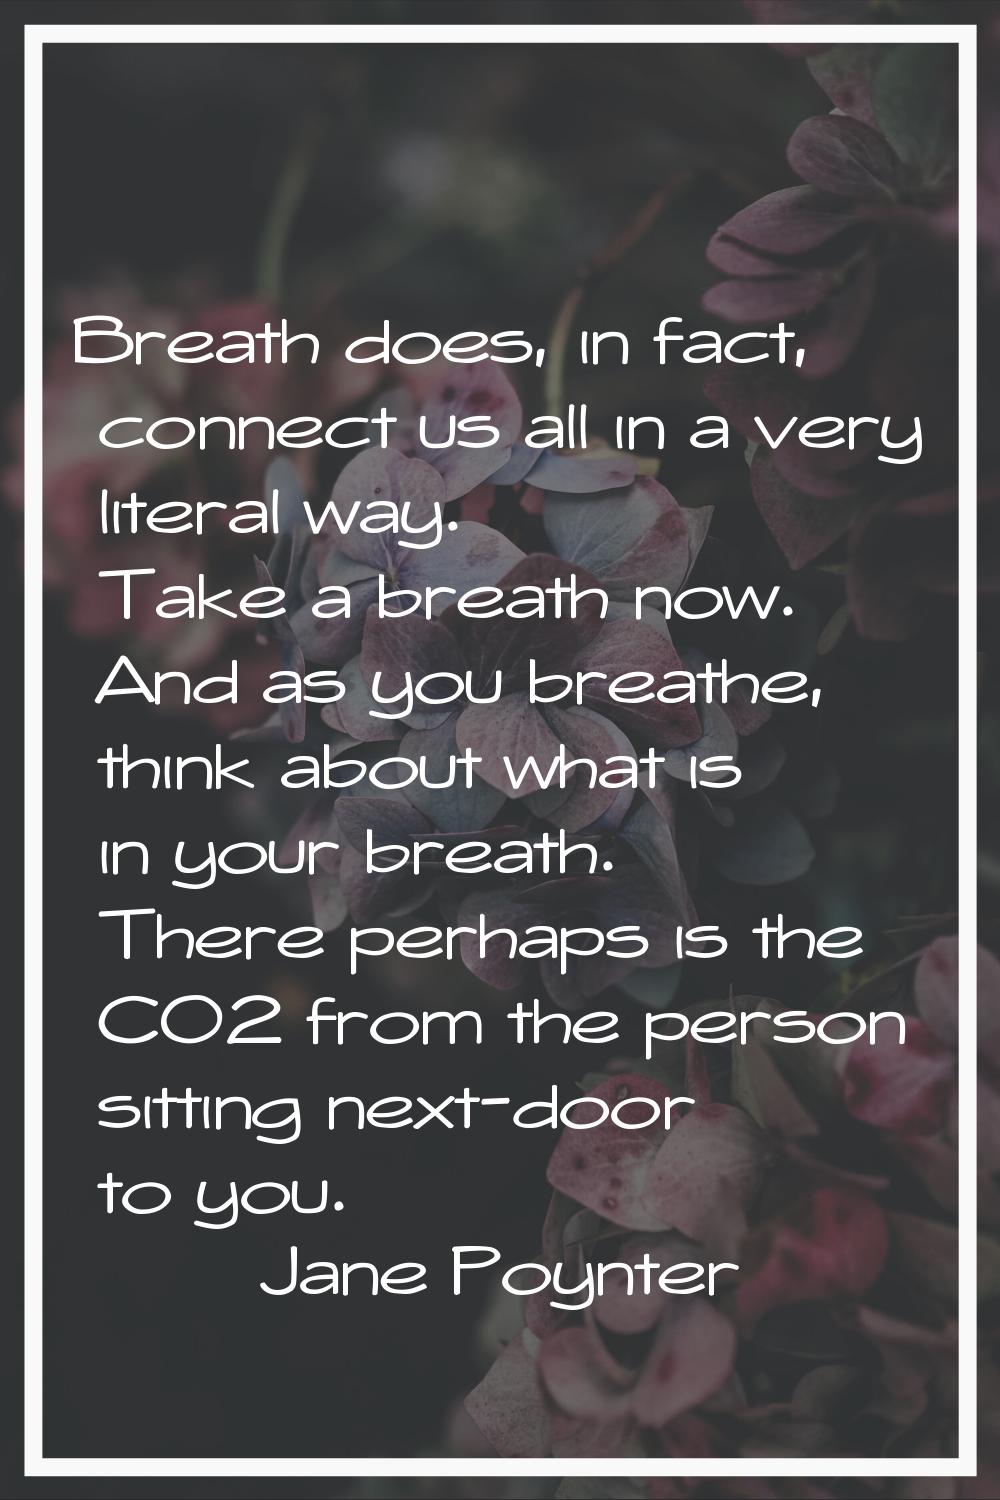 Breath does, in fact, connect us all in a very literal way. Take a breath now. And as you breathe, 